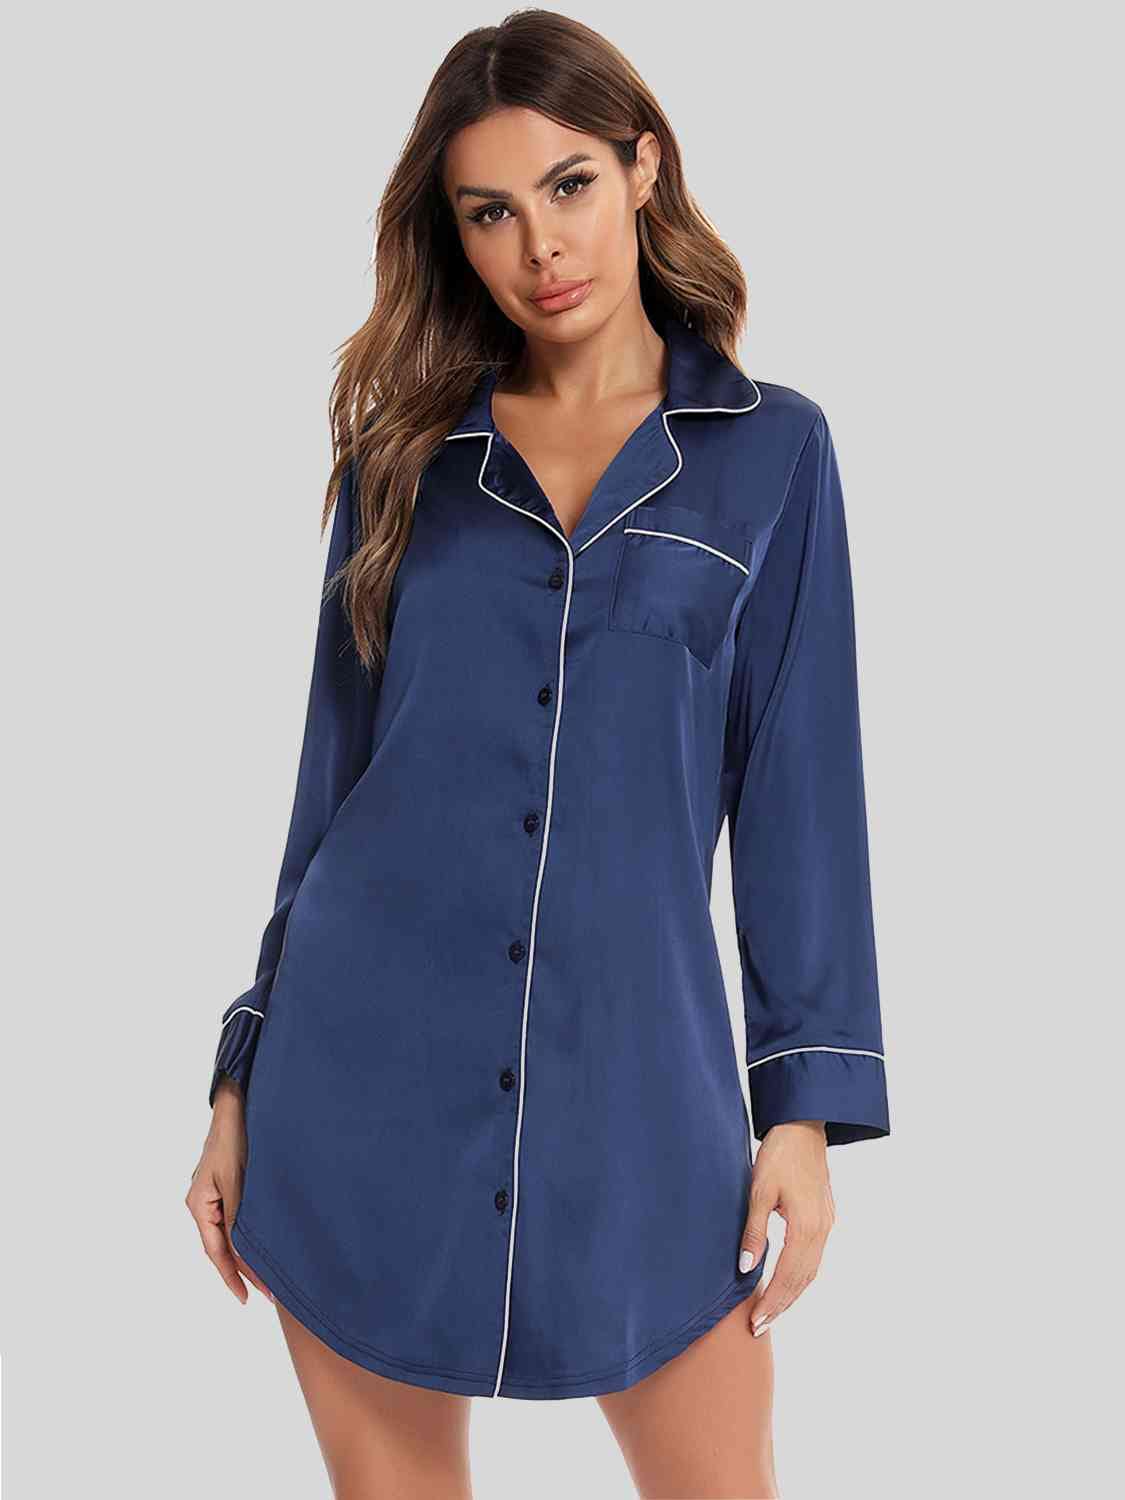 Trendsi Peacock  Blue / S Button Up Lapel Collar Night Dress with Pocket 101100834678970 Apparel &amp; Accessories &gt; Clothing &gt; Sleepwear &amp; Loungewear &gt; Robes